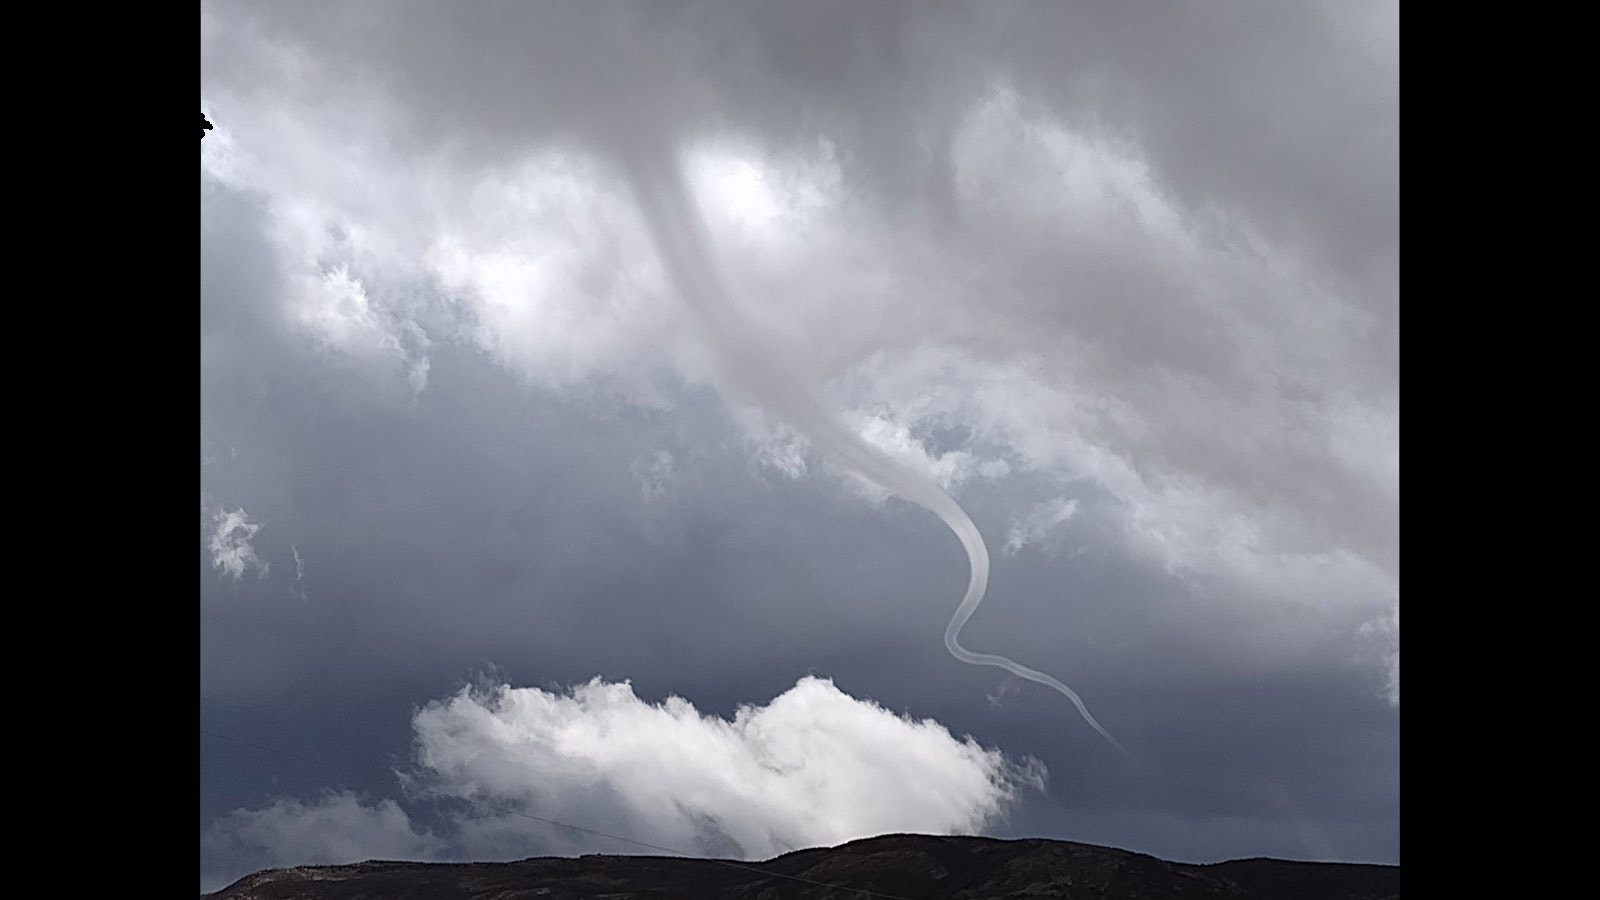 Albany County resident David De Pastina captured this photo of a funnel cloud that nearly touched down near his home about 7 miles northeast of Laramie at about 11:30 a.m. Thursday.